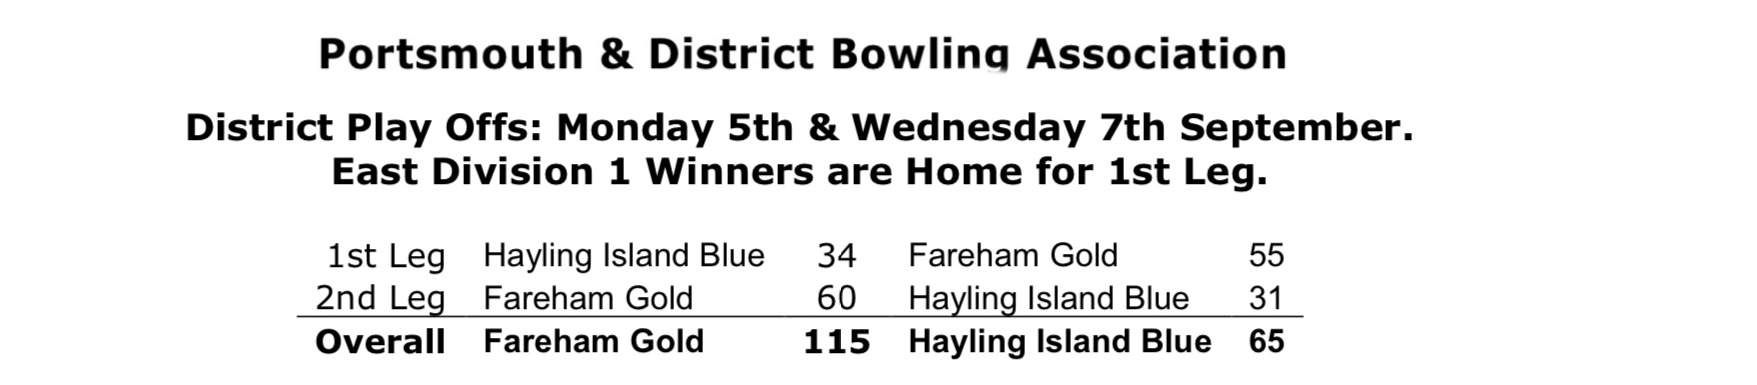 Portsmouth & District Bowling  Association Midweek District Winners